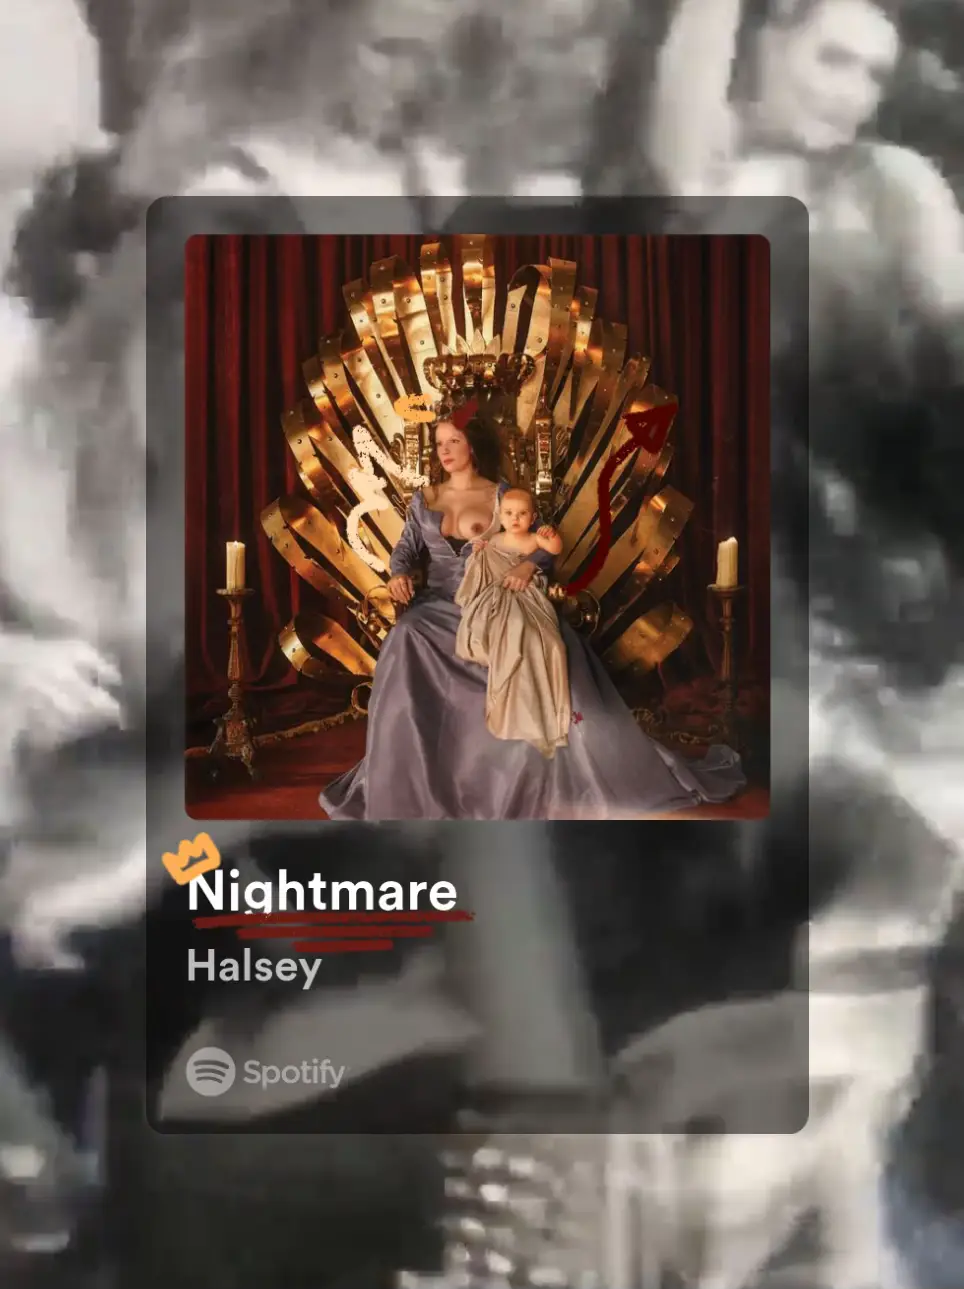  A Spotify ad for a song by Halsey.